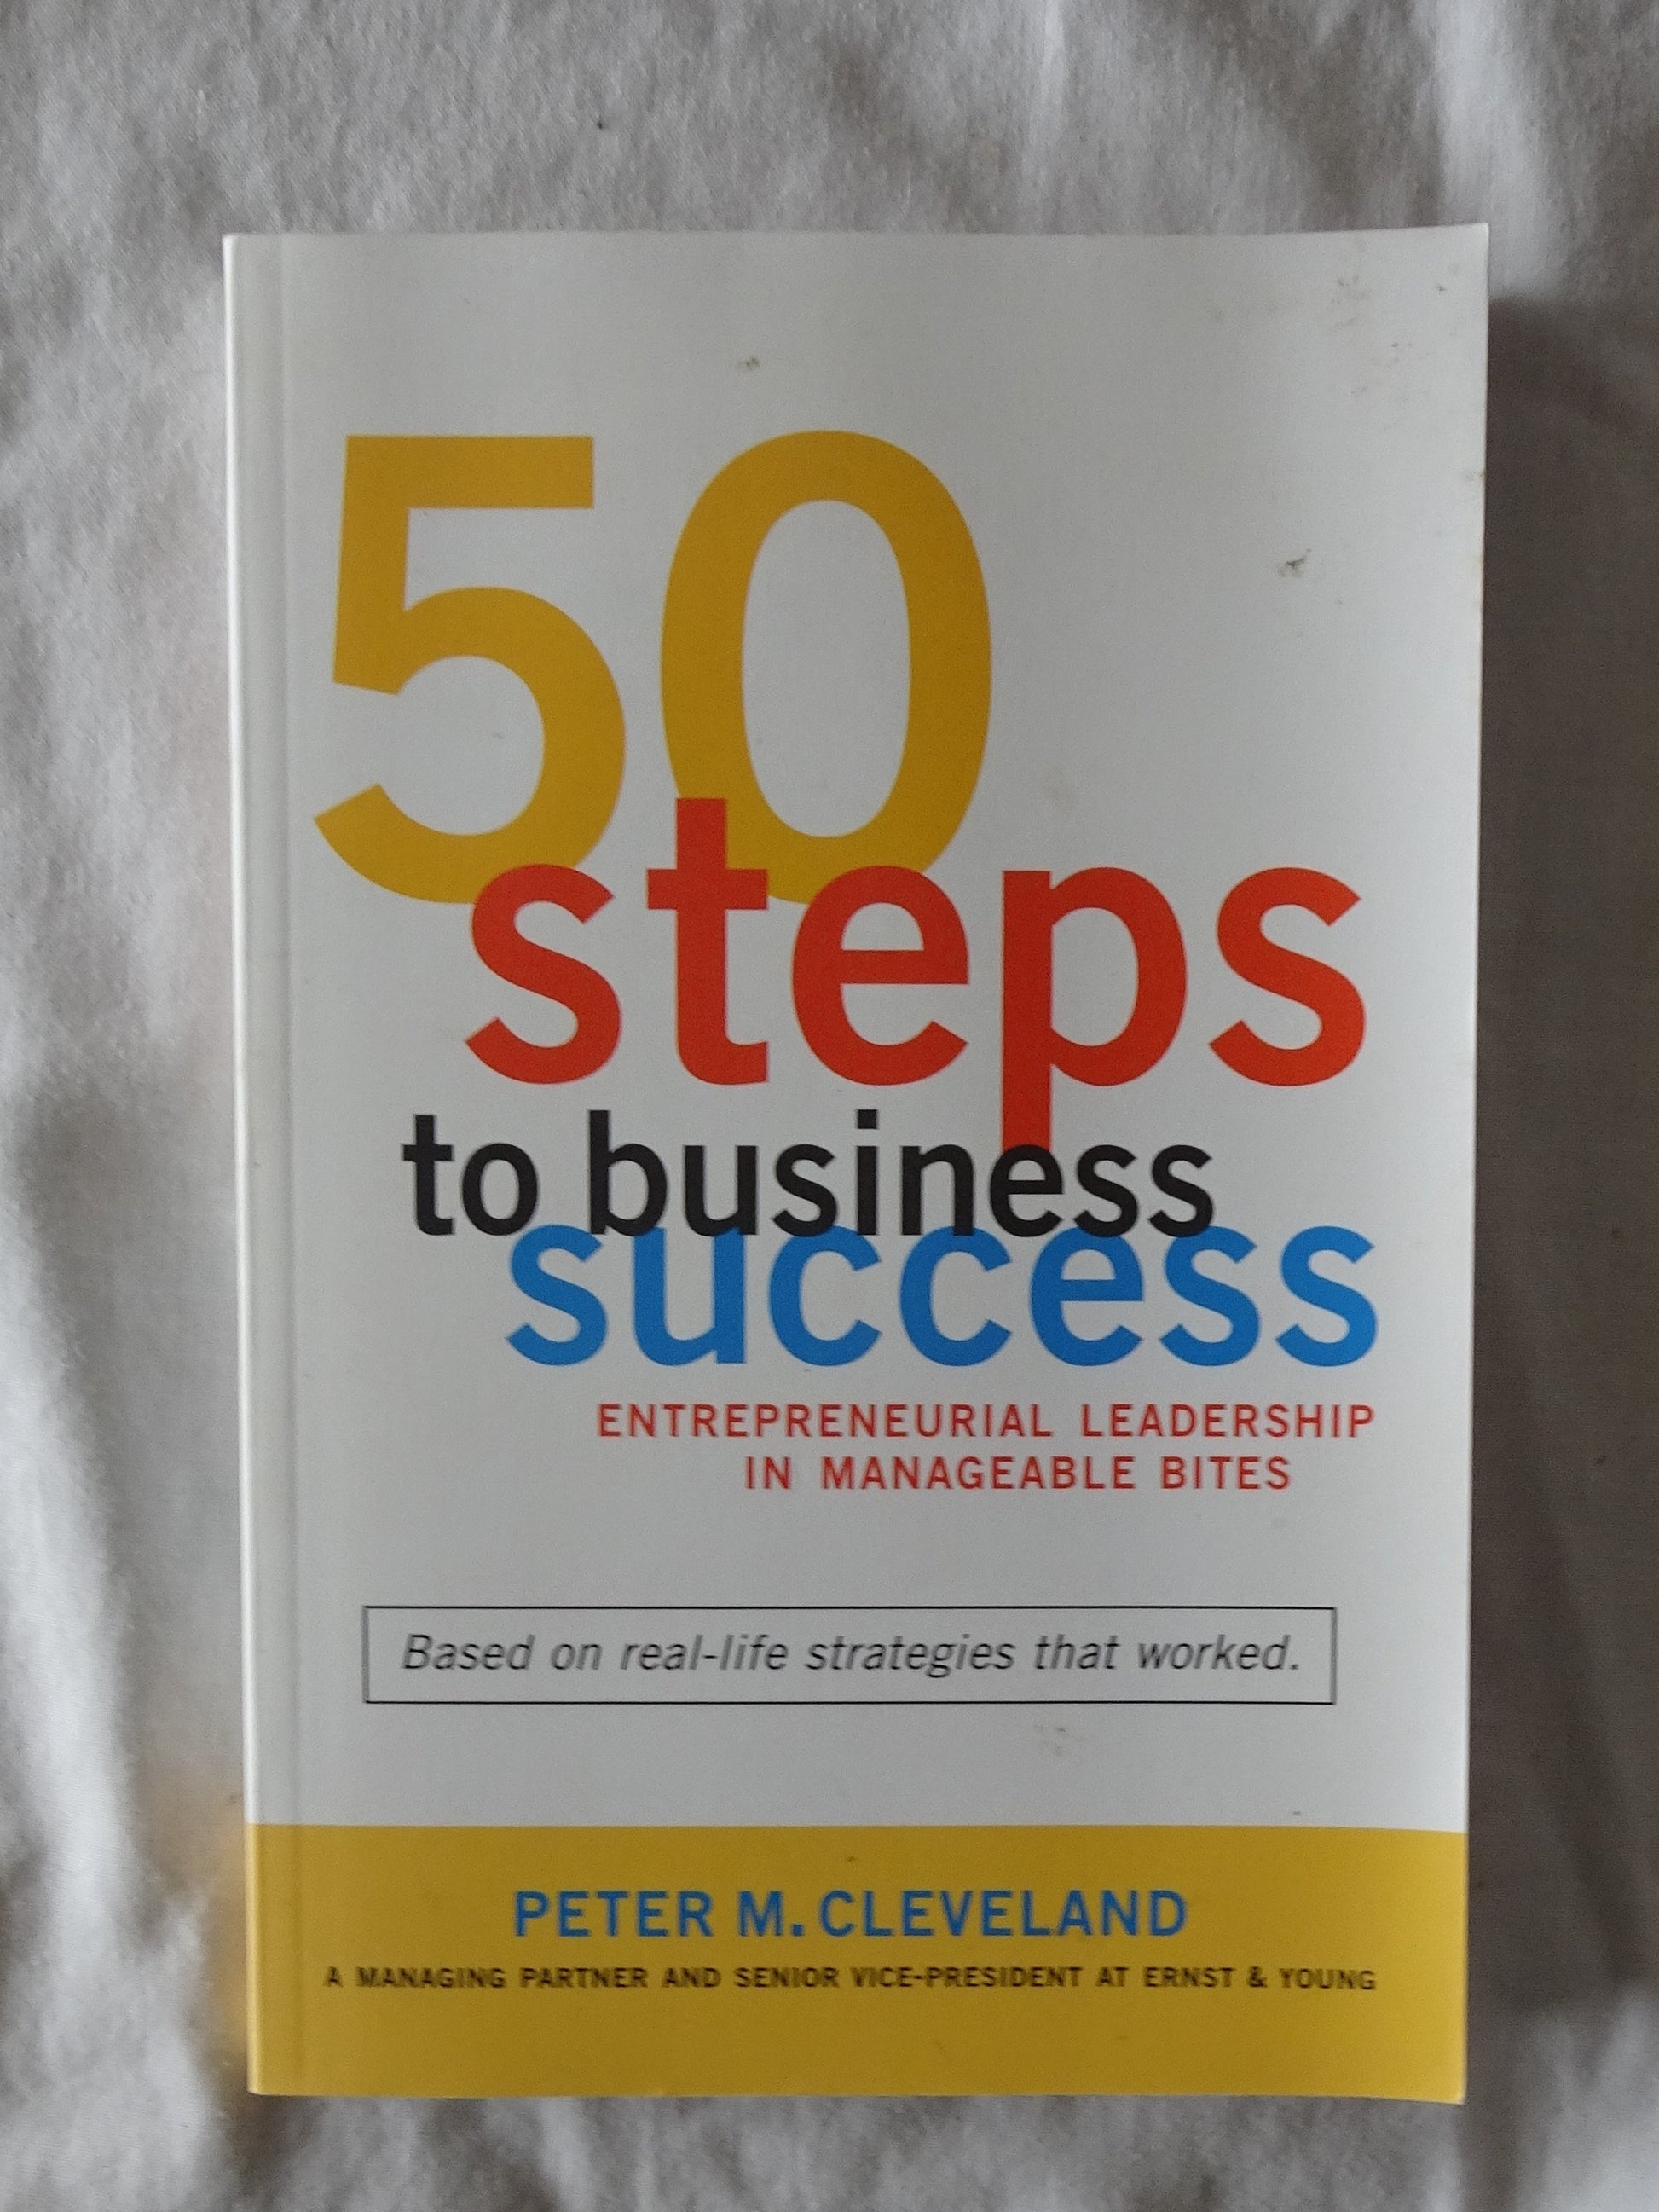 50 Steps to Business Success by Peter M. Cleveland